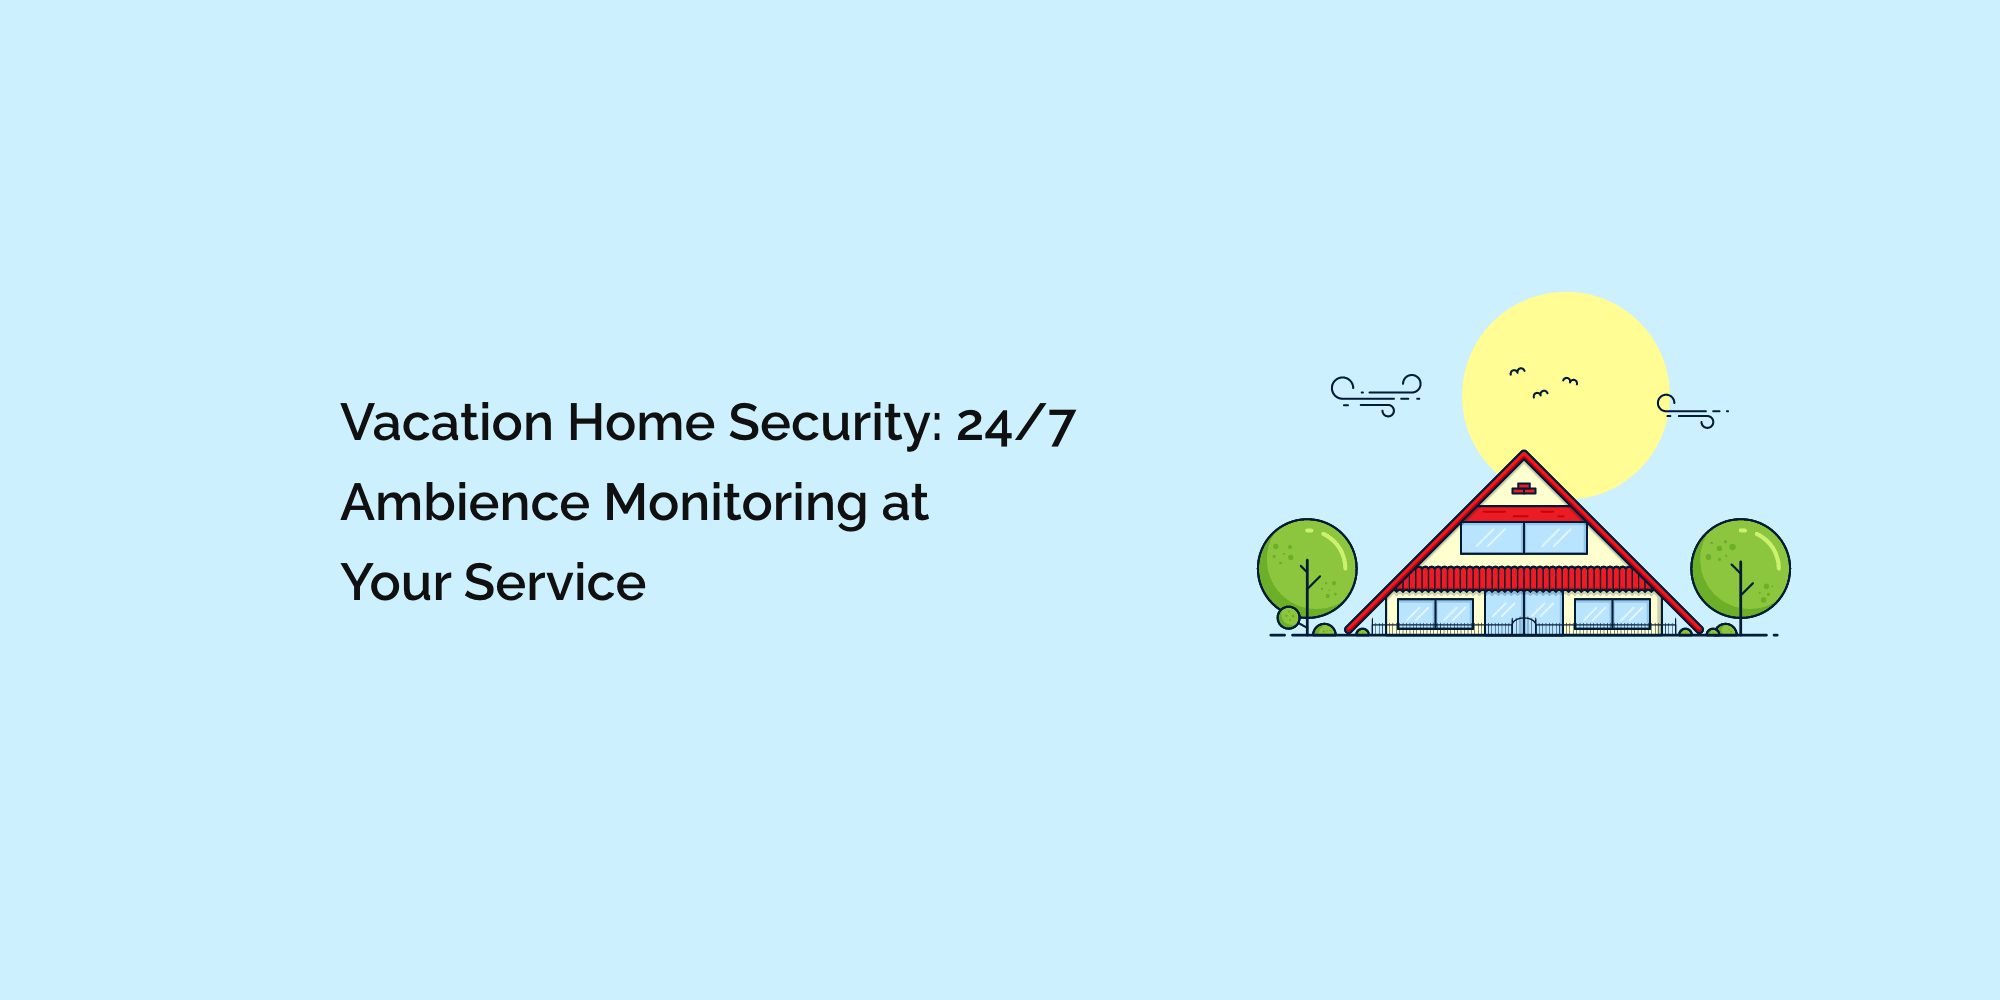 Vacation Home Security: 24/7 Ambience Monitoring at Your Service